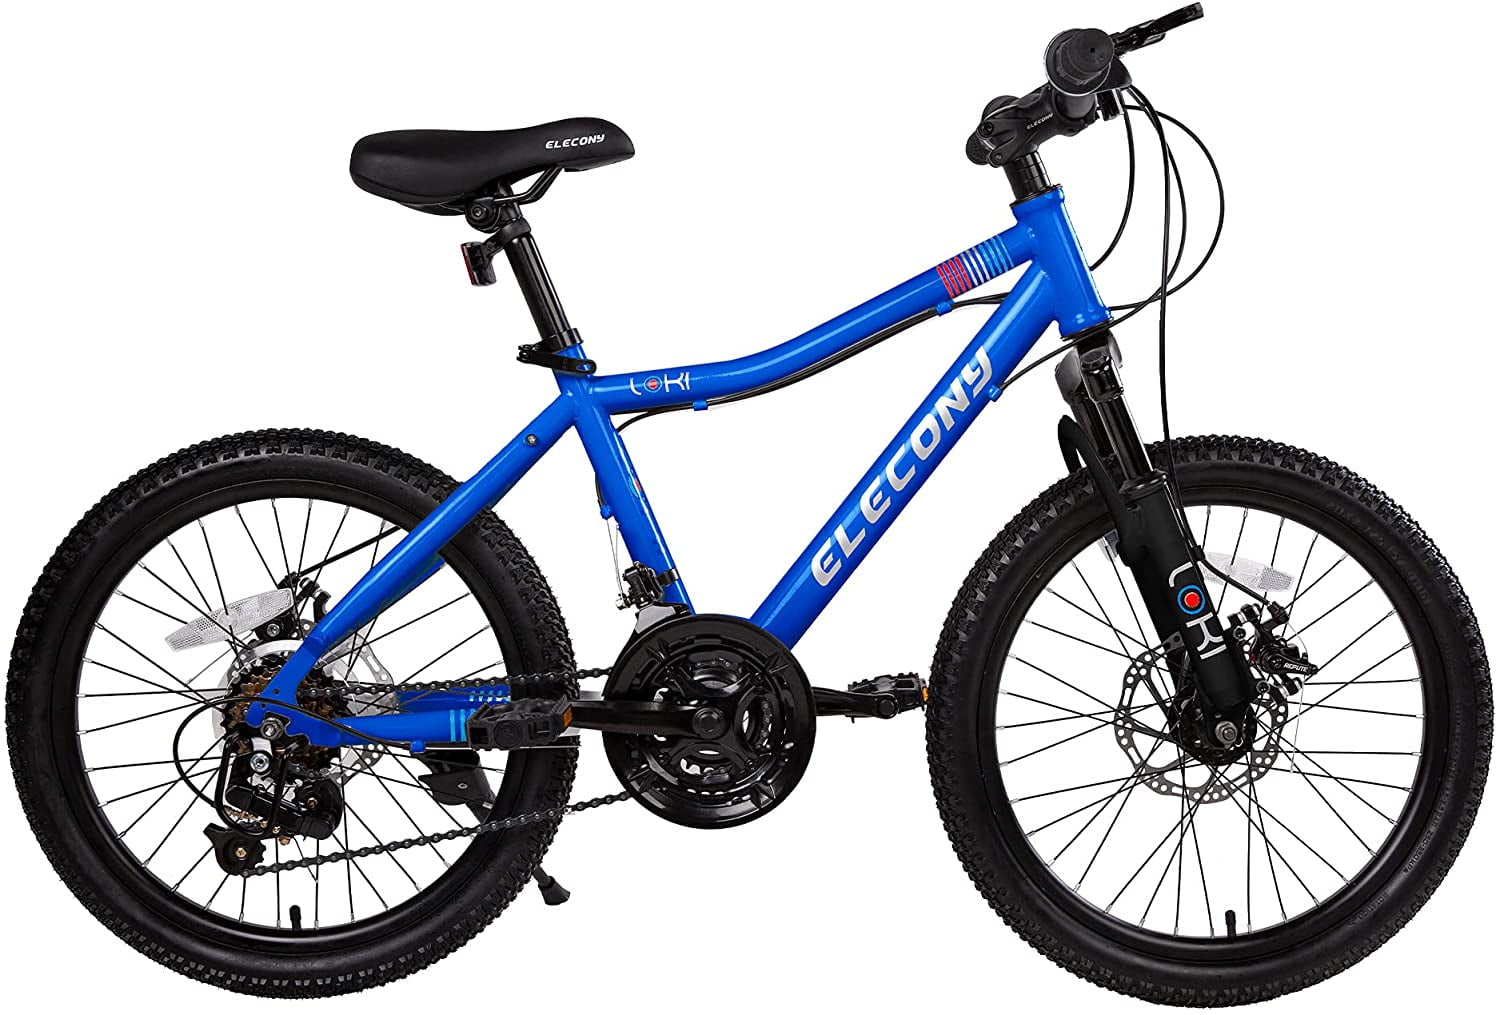 20 Inch Frame Elecony 20 Kids Mountain Bike for Boys/Girls Dual Suspension Safer Brake System for Kids 21 Speed Bicycle Lightweight Steel Construction 